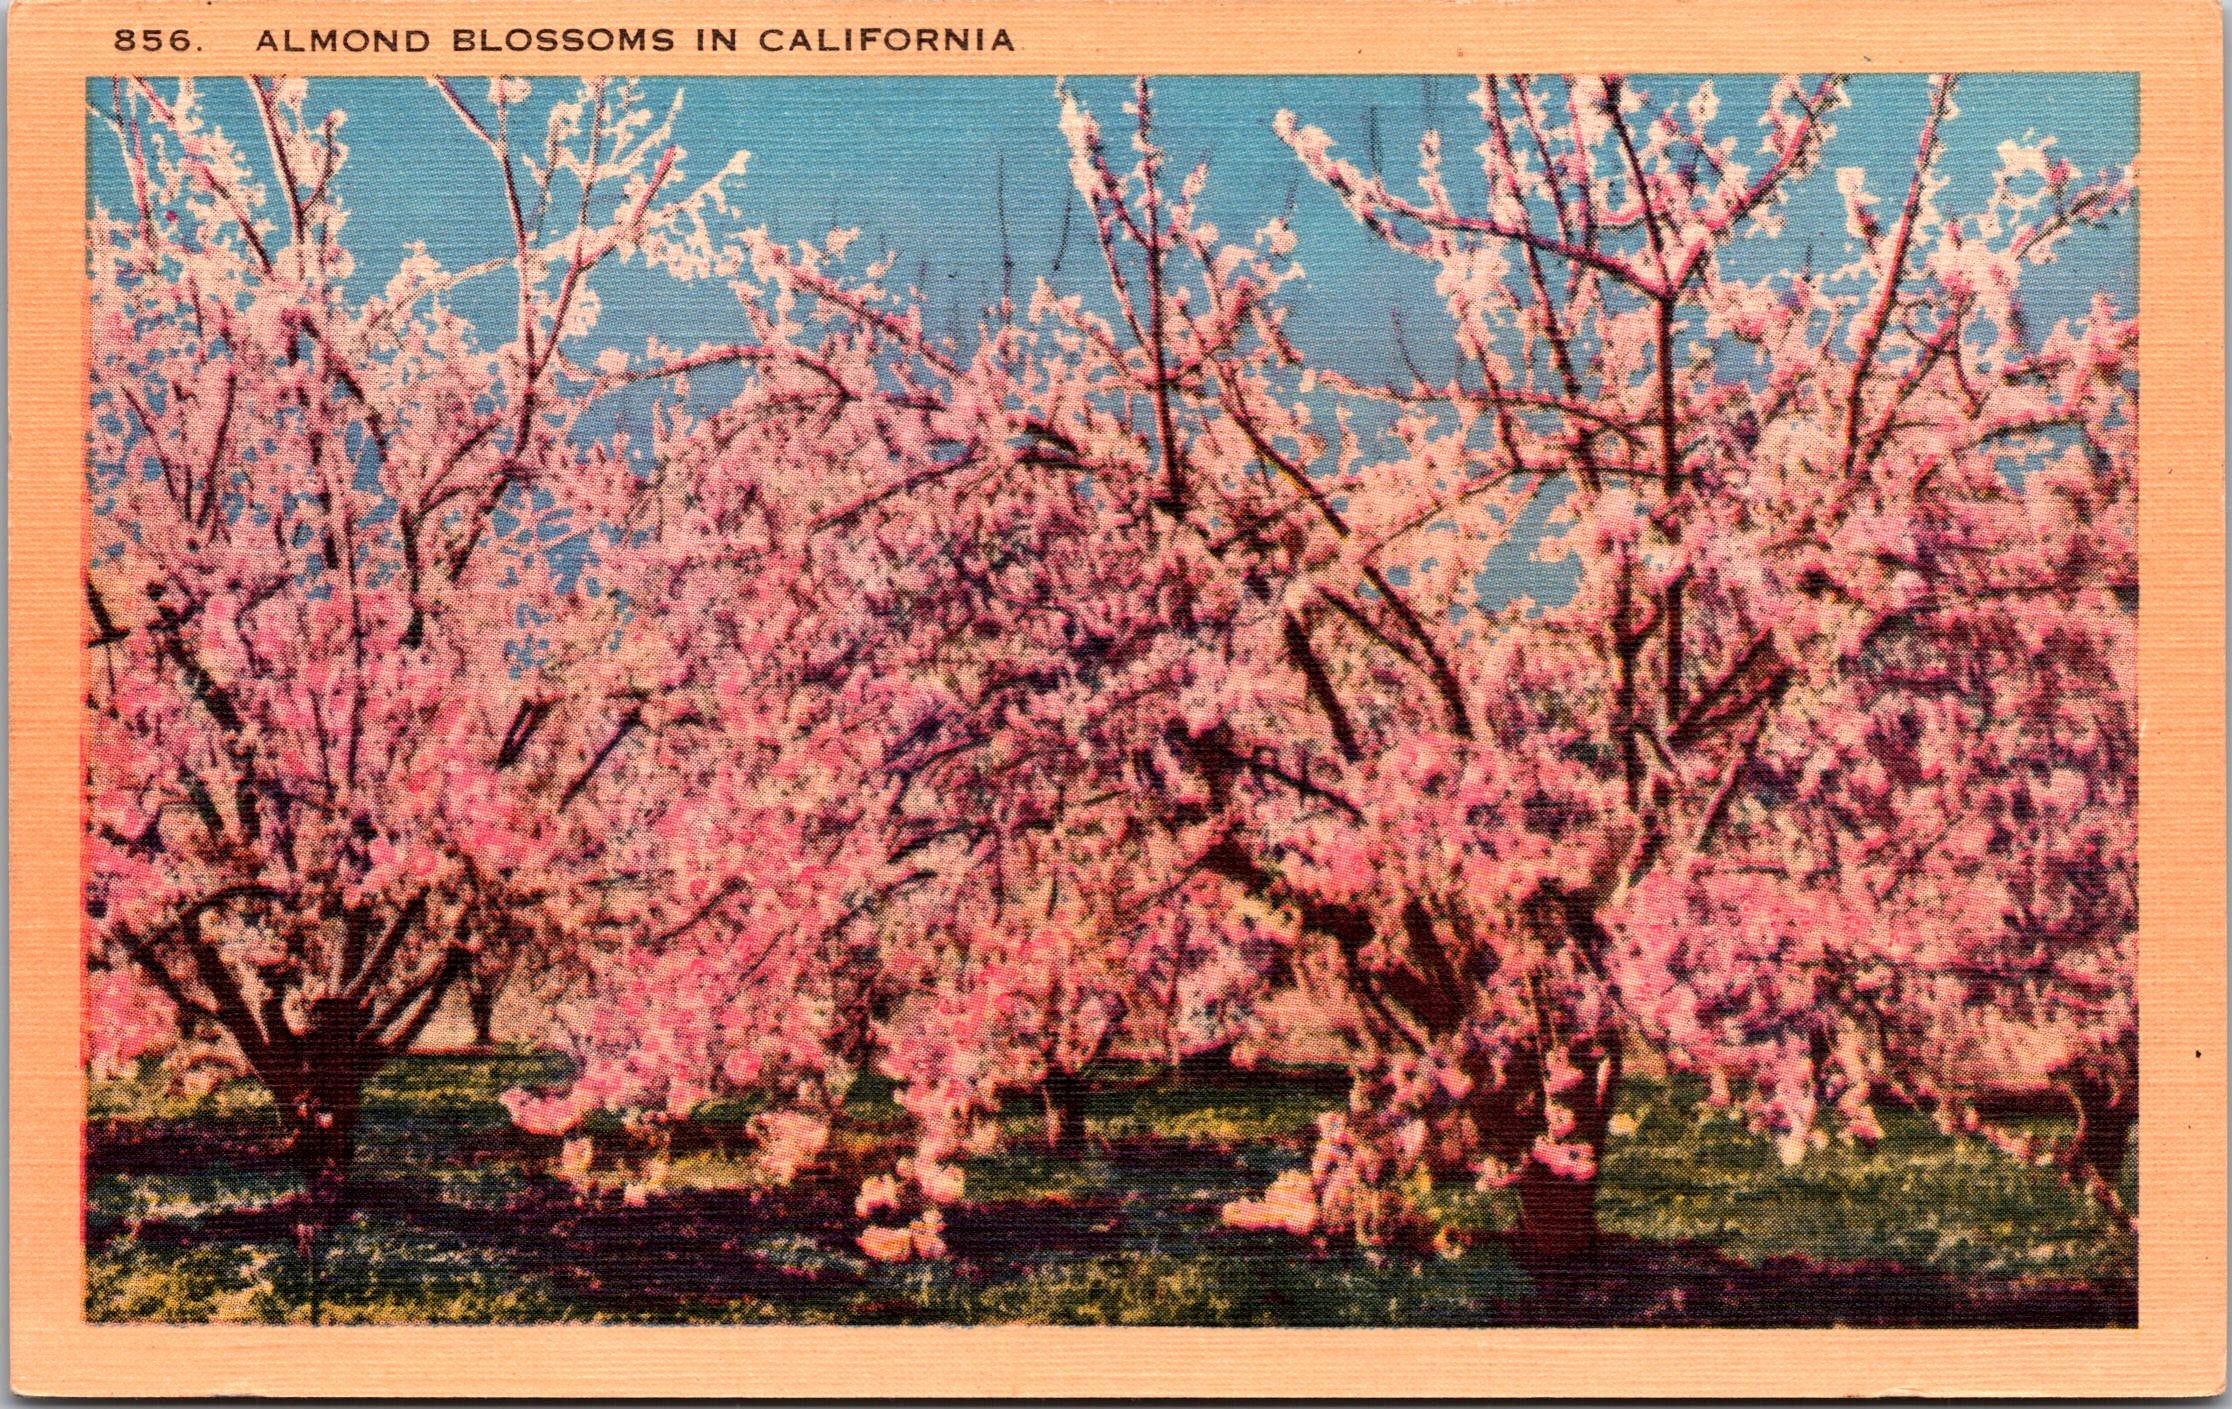 Blossoming Pink Orchards, 17,000 Tons Almonds Produced Yearly, Vintage PC